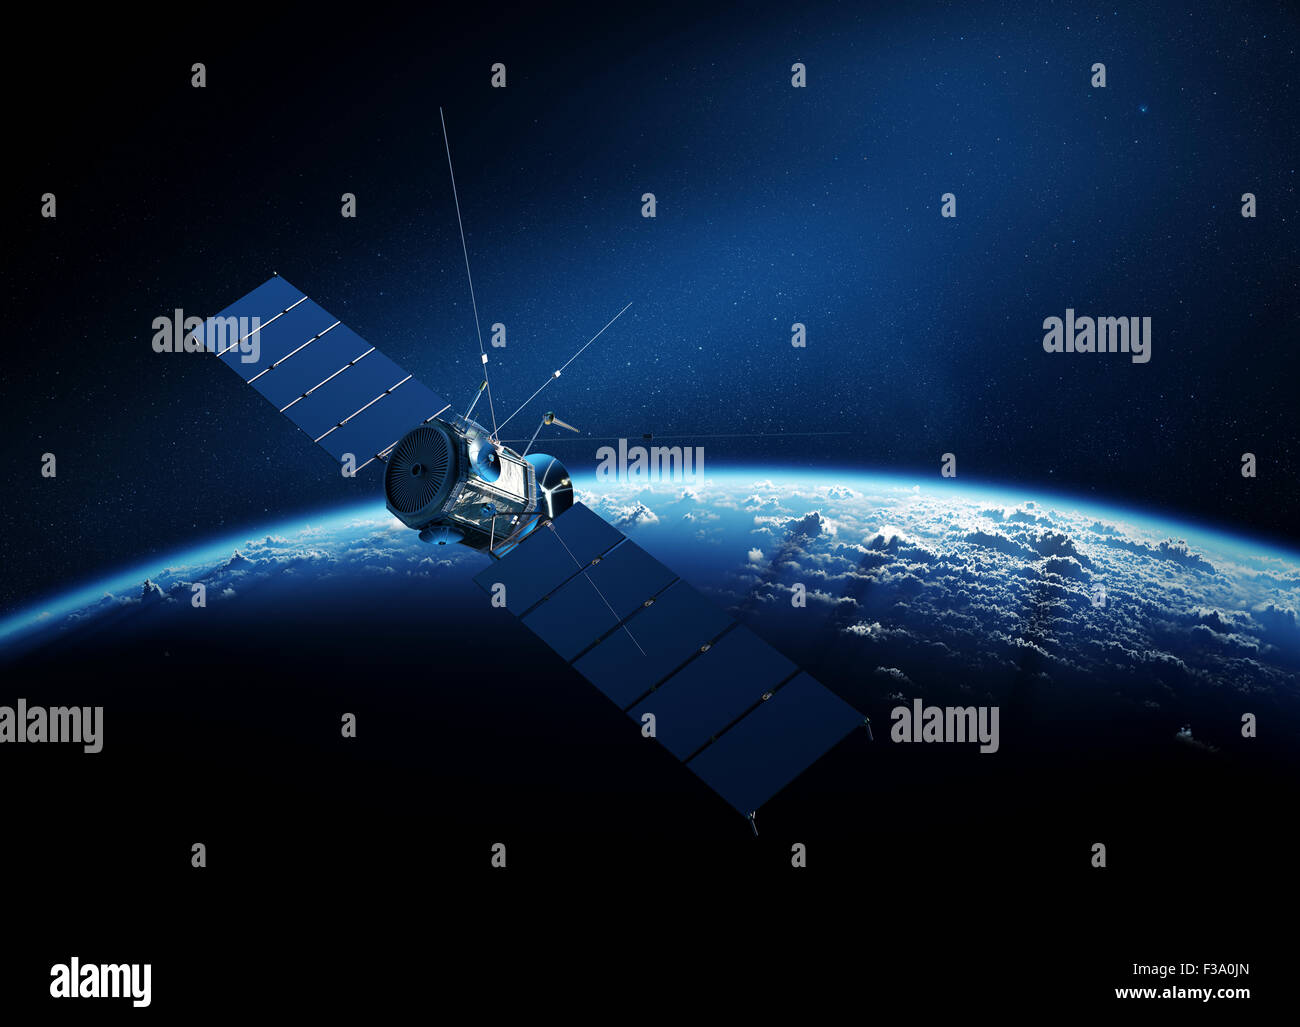 Communications satellite orbiting Earth with sunrise in space Stock Photo